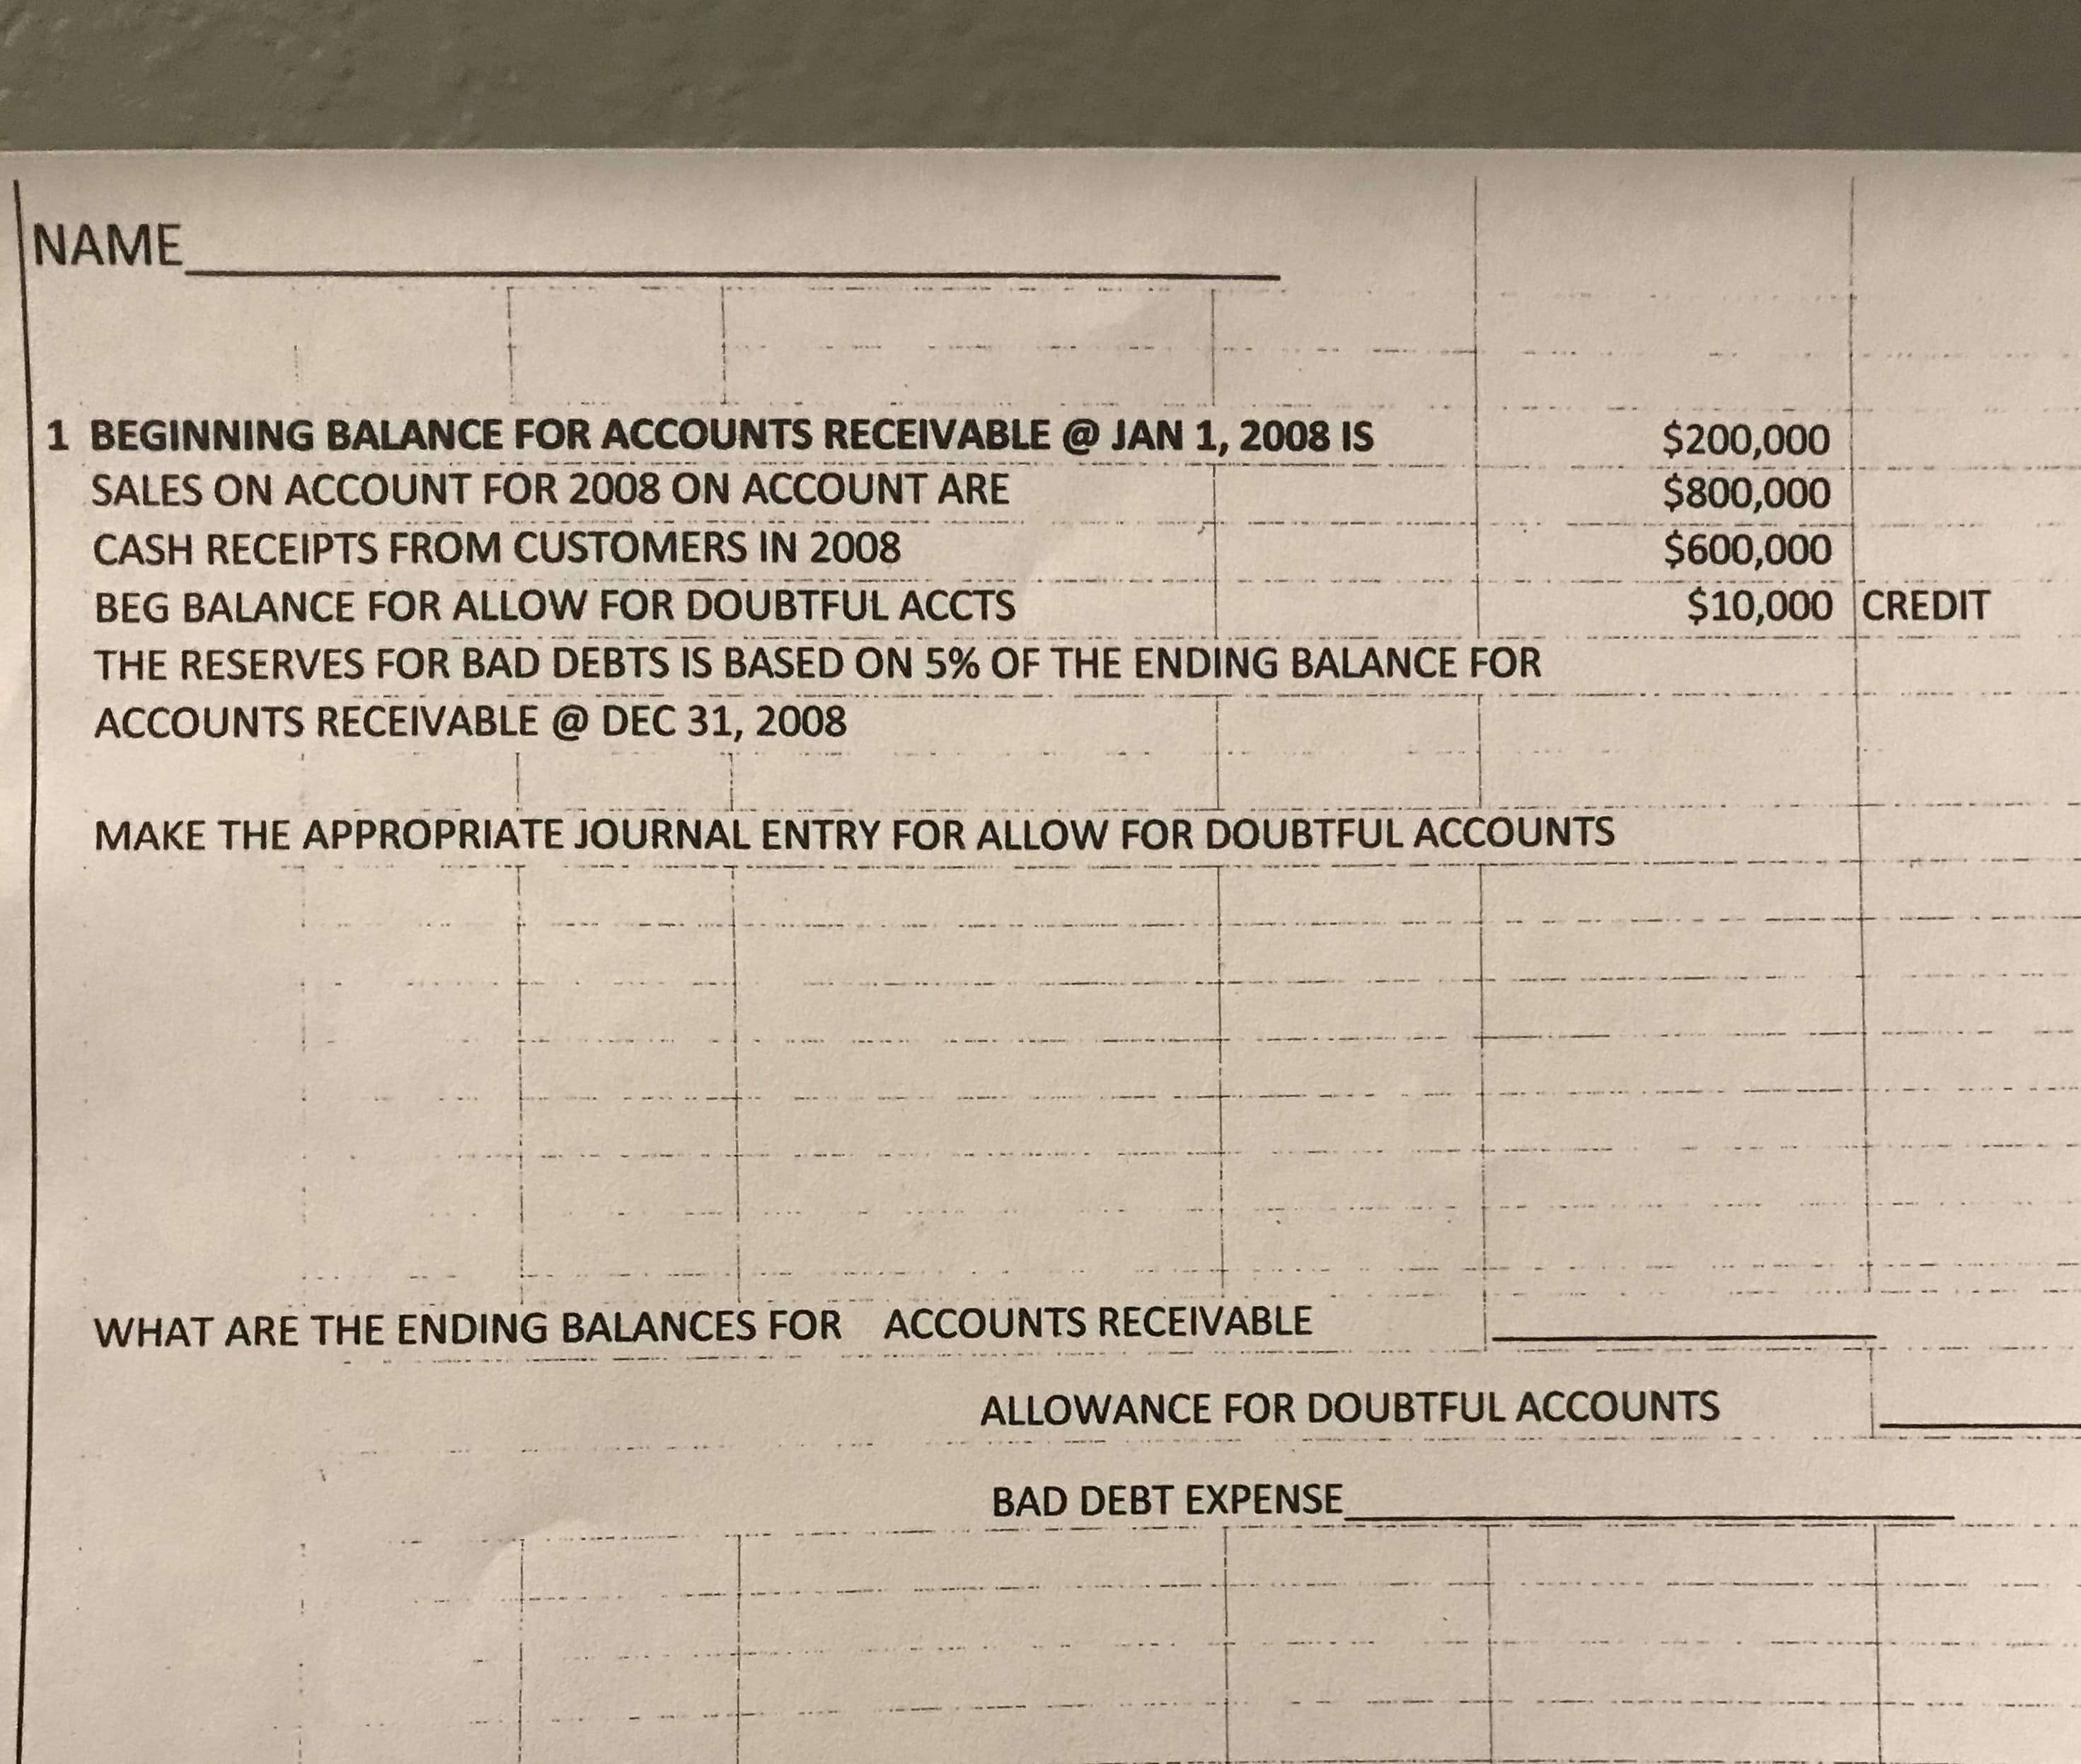 NAME
1 BEGINNING BALANCE FOR ACCOUNTS RECEIVABLE @ JAN 1, 2008 IS
SALES ON ACCOUNT FOR 2008 ON ACCOUNT ARE
$200,000
$800,000
$600,000
$10,000 CREDIT
CASH RECEIPTS FROM CUSTOMERS IN 2008
BEG BALANCE FOR ALLOW FOR DOUBTFUL ACCTS
THE RESERVES FOR BAD DEBTS IS BASED ON 5% OF THE ENDING BALANCE FOR
ACCOUNTS RECEIVABLE @ DEC 31, 2008
MAKE THE APPROPRIATE JOURNAL ENTRY FOR ALLOW FOR DOUBTFUL ACCOUNTS
ACCOUNTS RECEIVABLE
WHAT ARE THE ENDING BALANCES FOR
ALLOWANCE FOR DOUBTFUL ACCOUNTS
BAD DEBT EXPENSE
